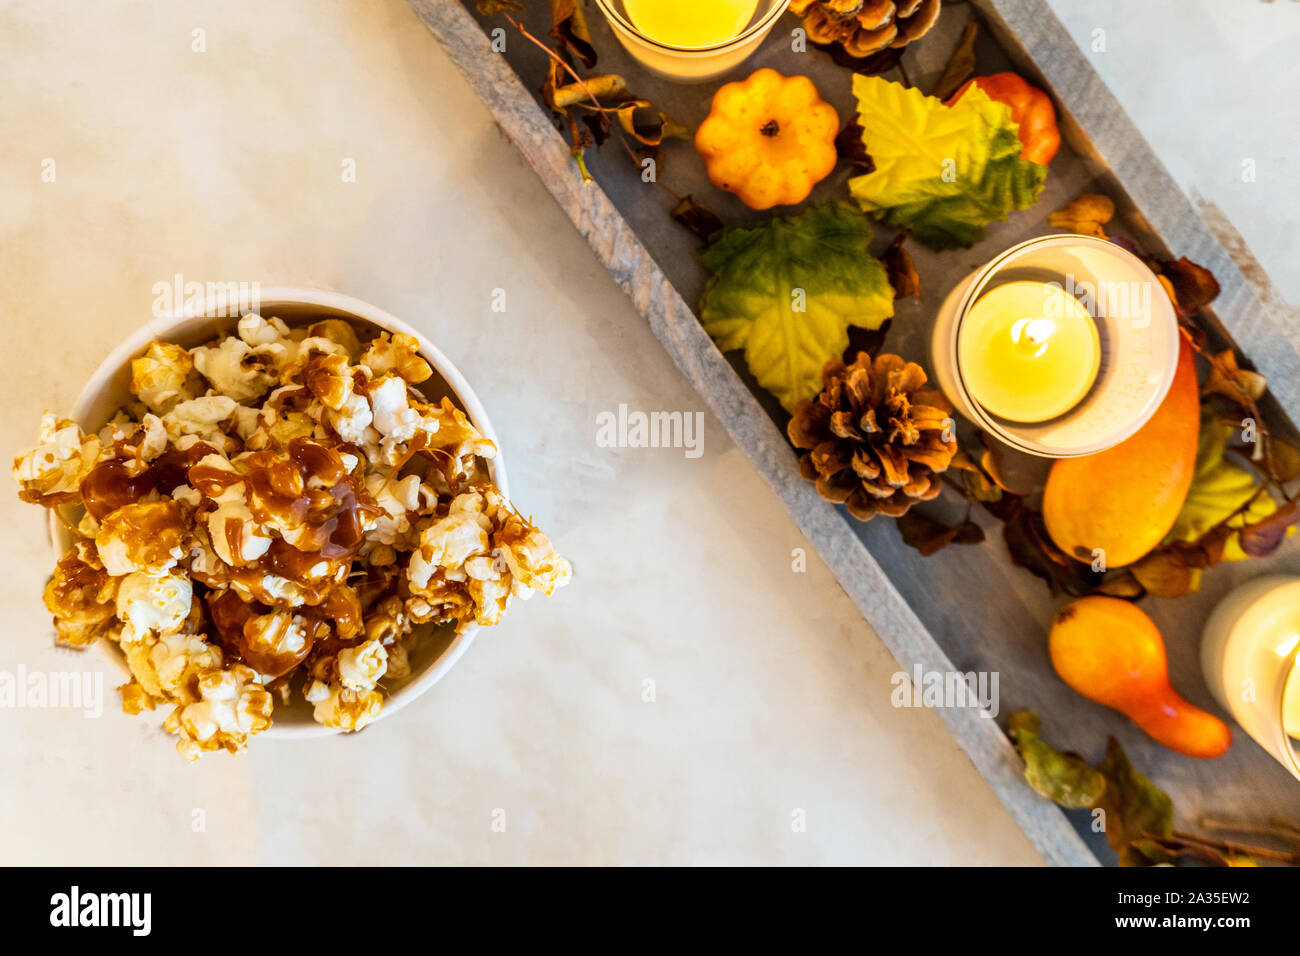 Homemade Caramel Popcorn with candles Stock Photo